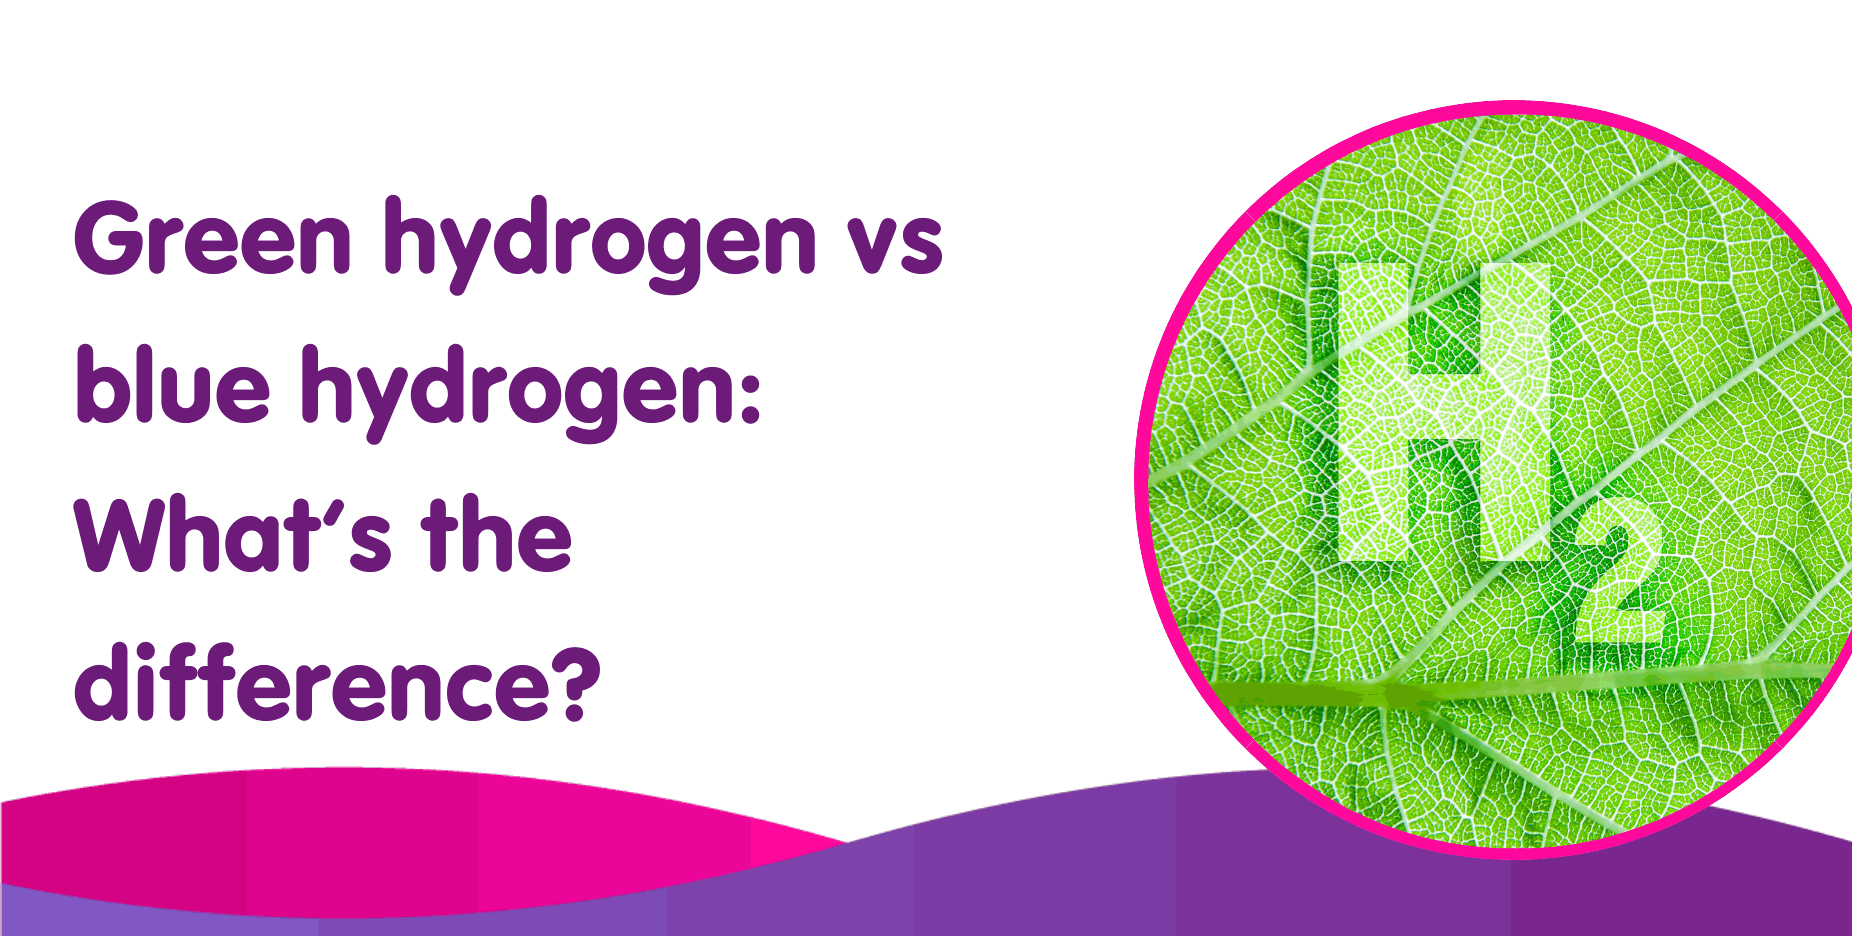 Green hydrogen vs blue hydrogen: What’s the difference?